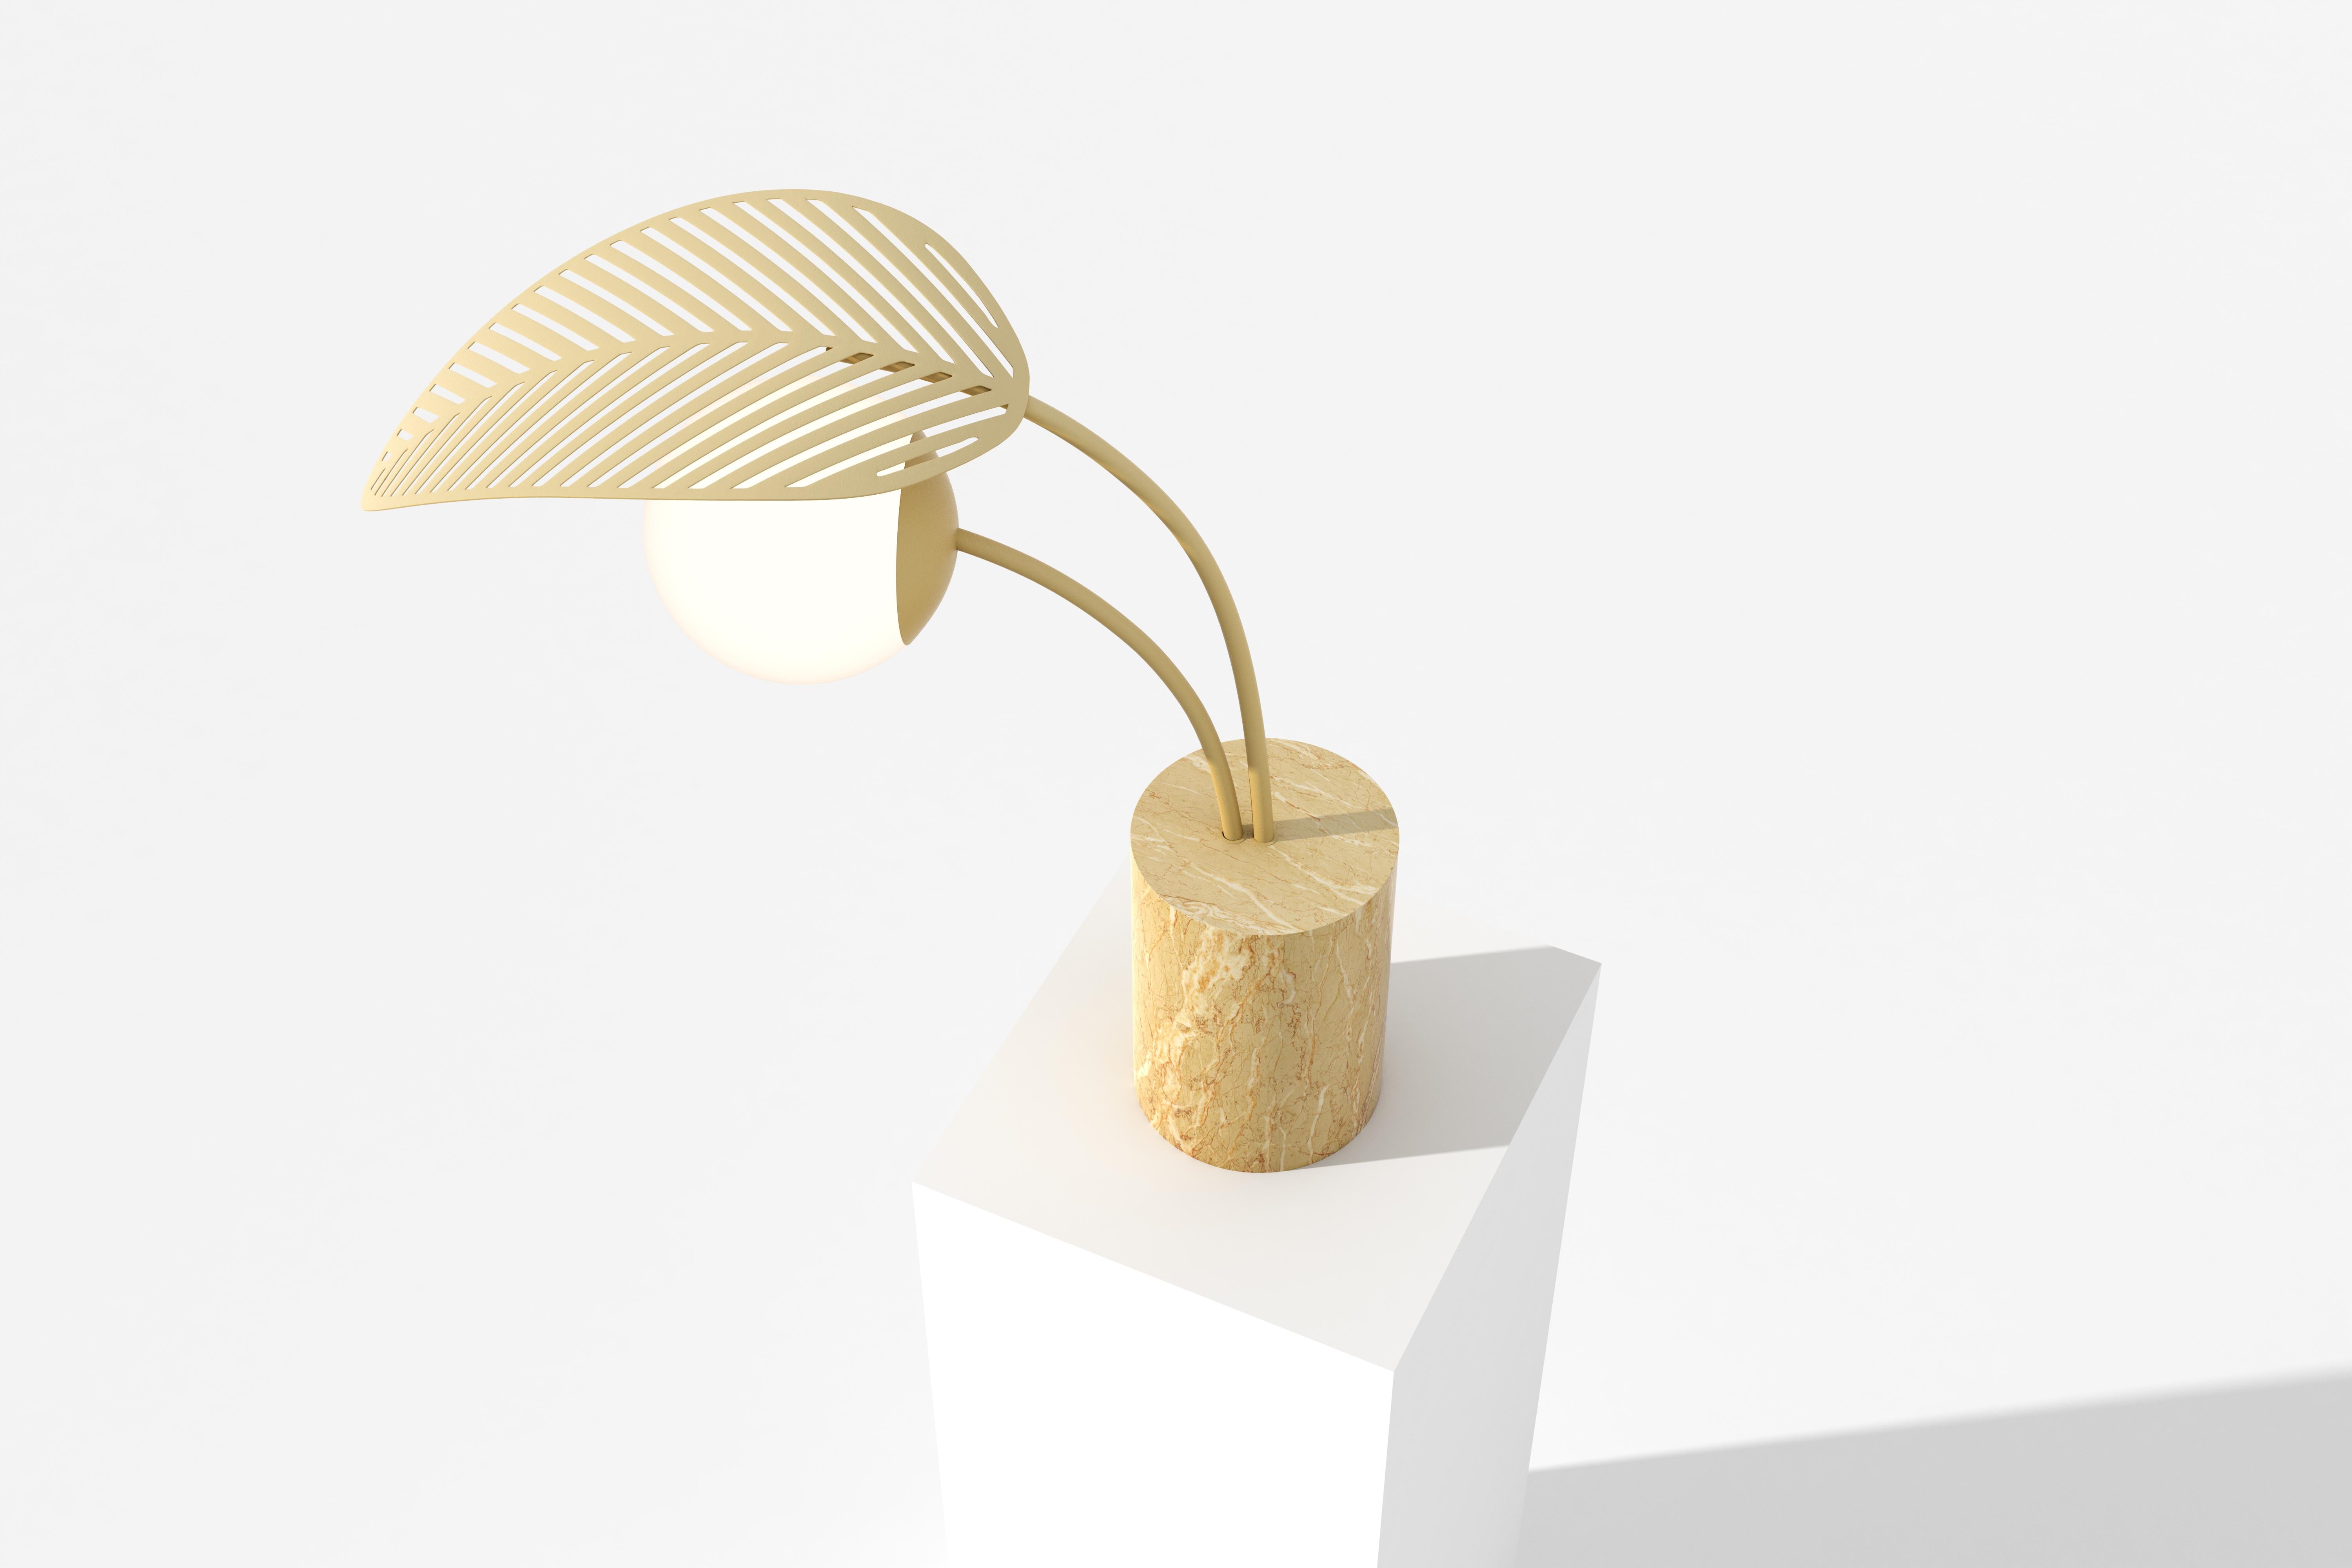 Floor lamp with Giallo d'Egitto gold marble base, sheltered by one palm leaf, die-cut in metal and powder coated in satin pale yellow.
Frosted lamp shade and dimmable light.

Designed by Parisian-Italian artist Marc Ange, who’s creations are